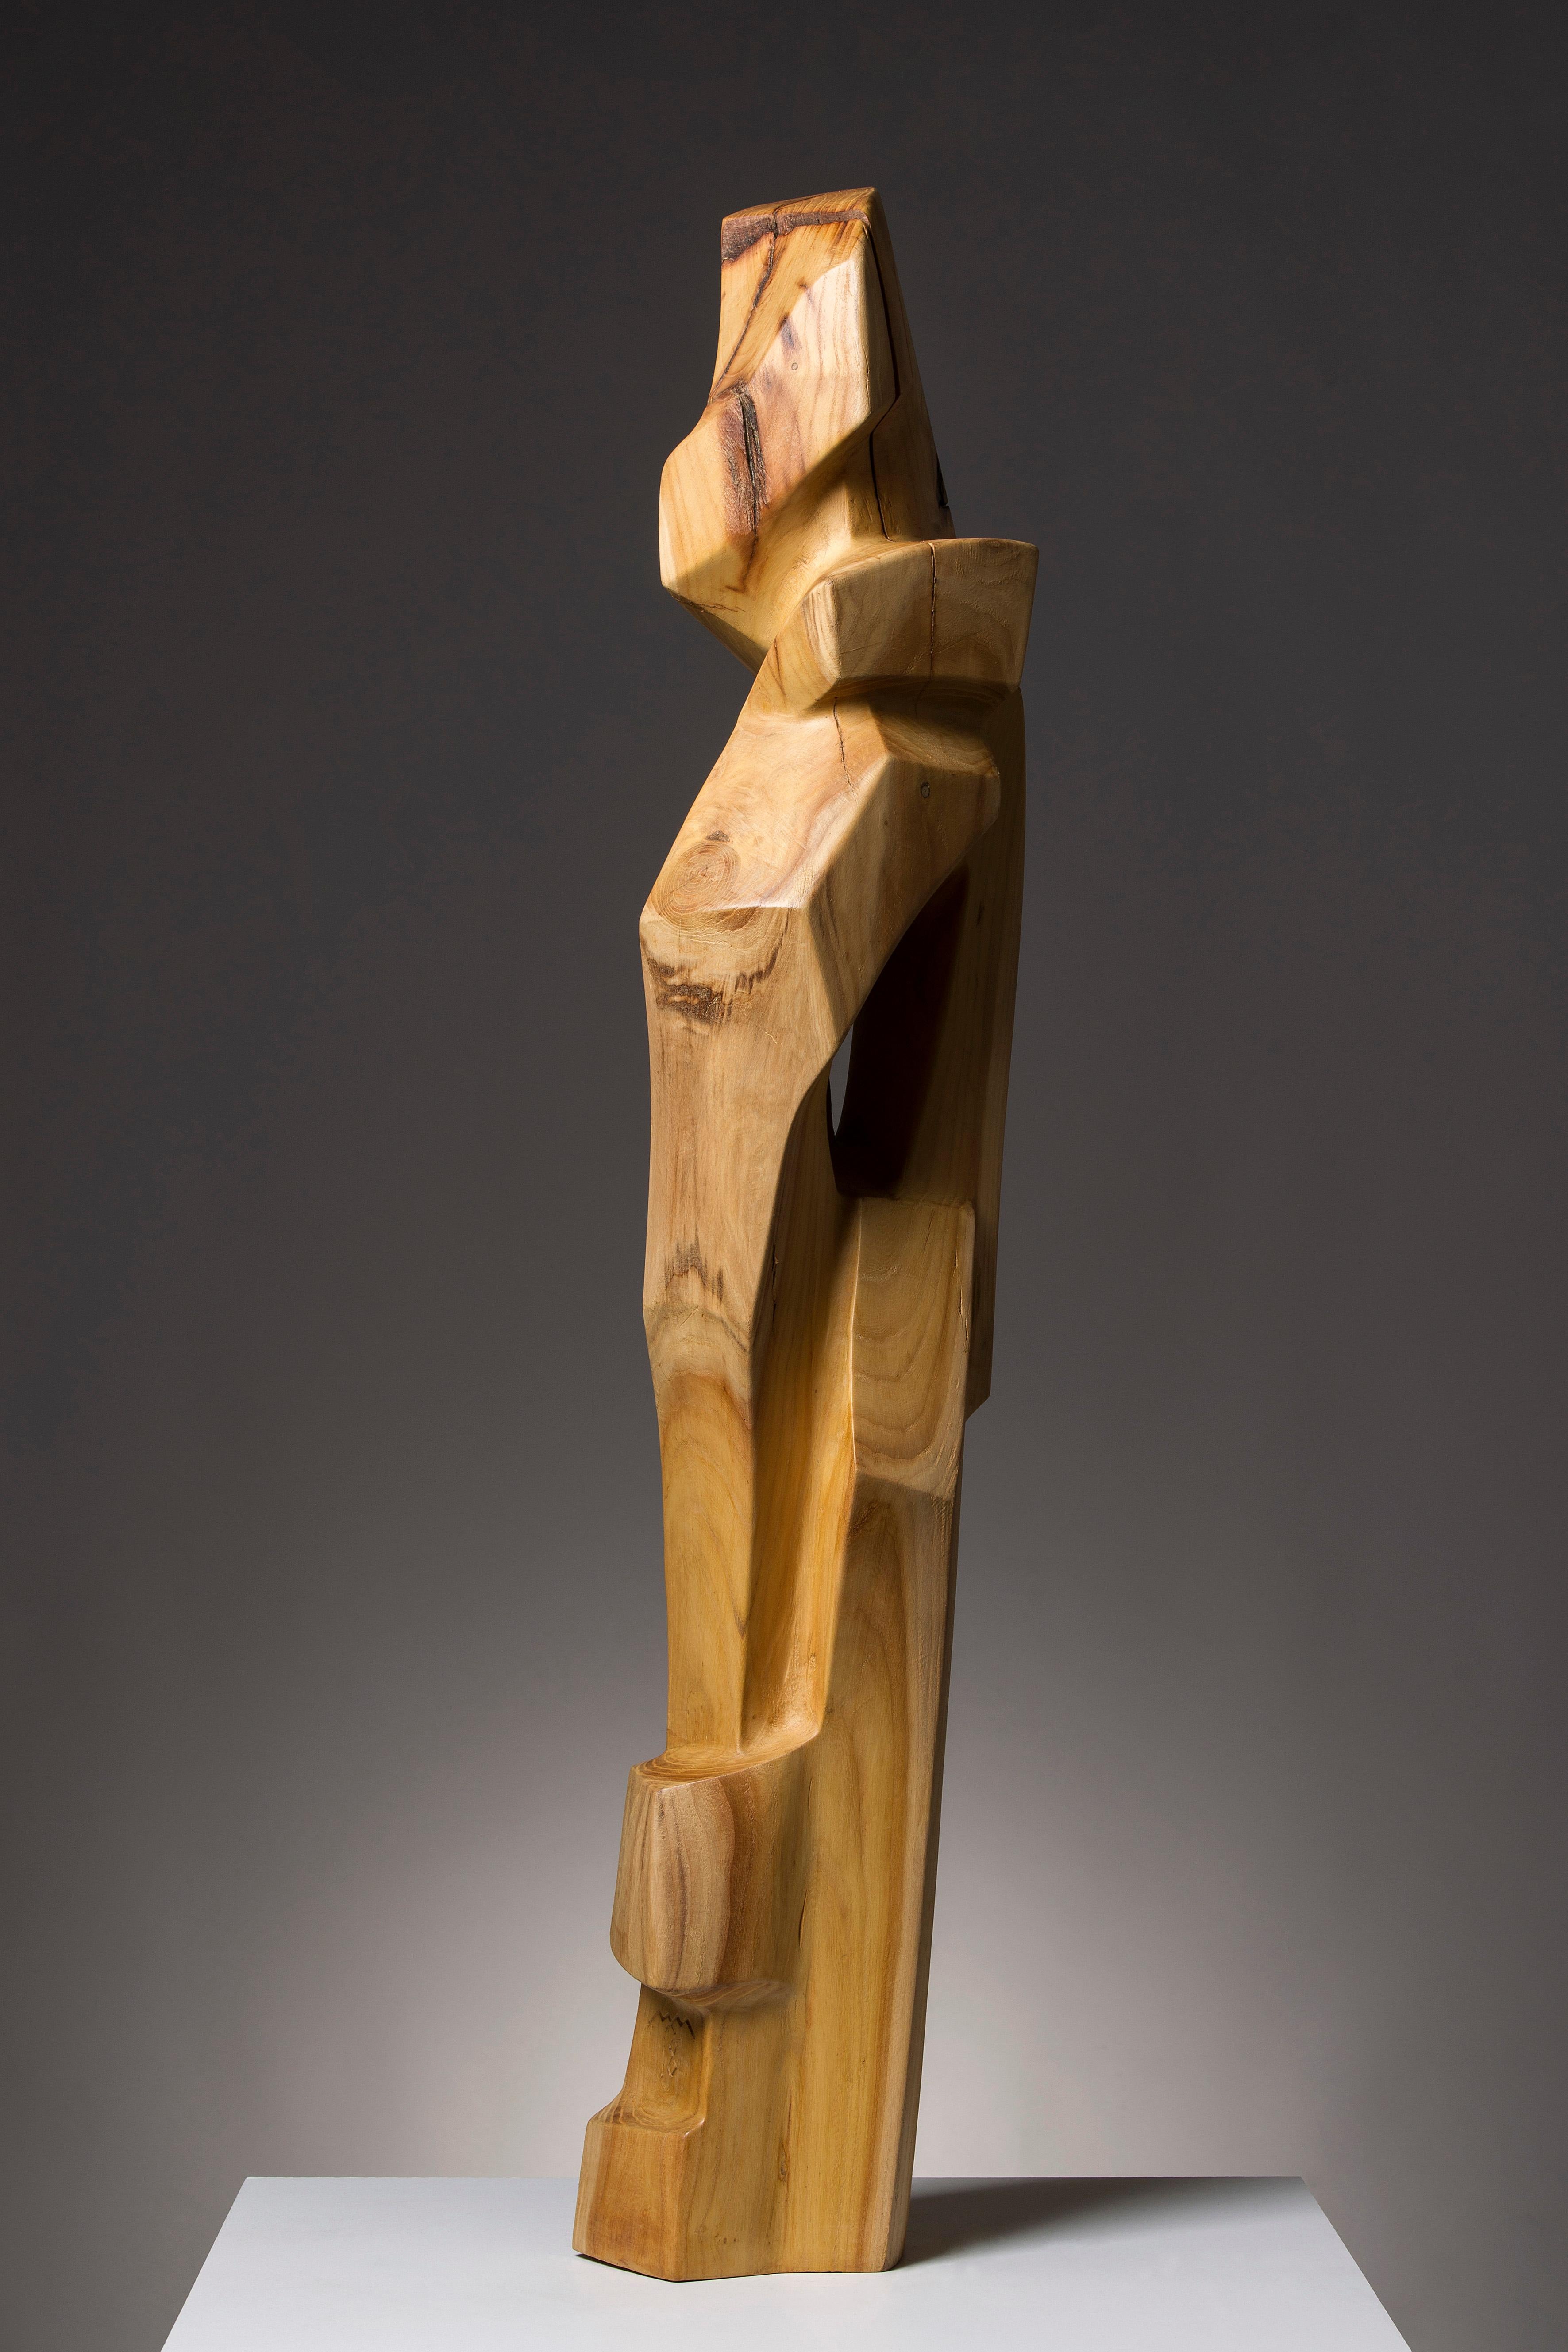 This wooden sculpture, called by Artist Symphony, was produced in 2018. The work is one of its kind.